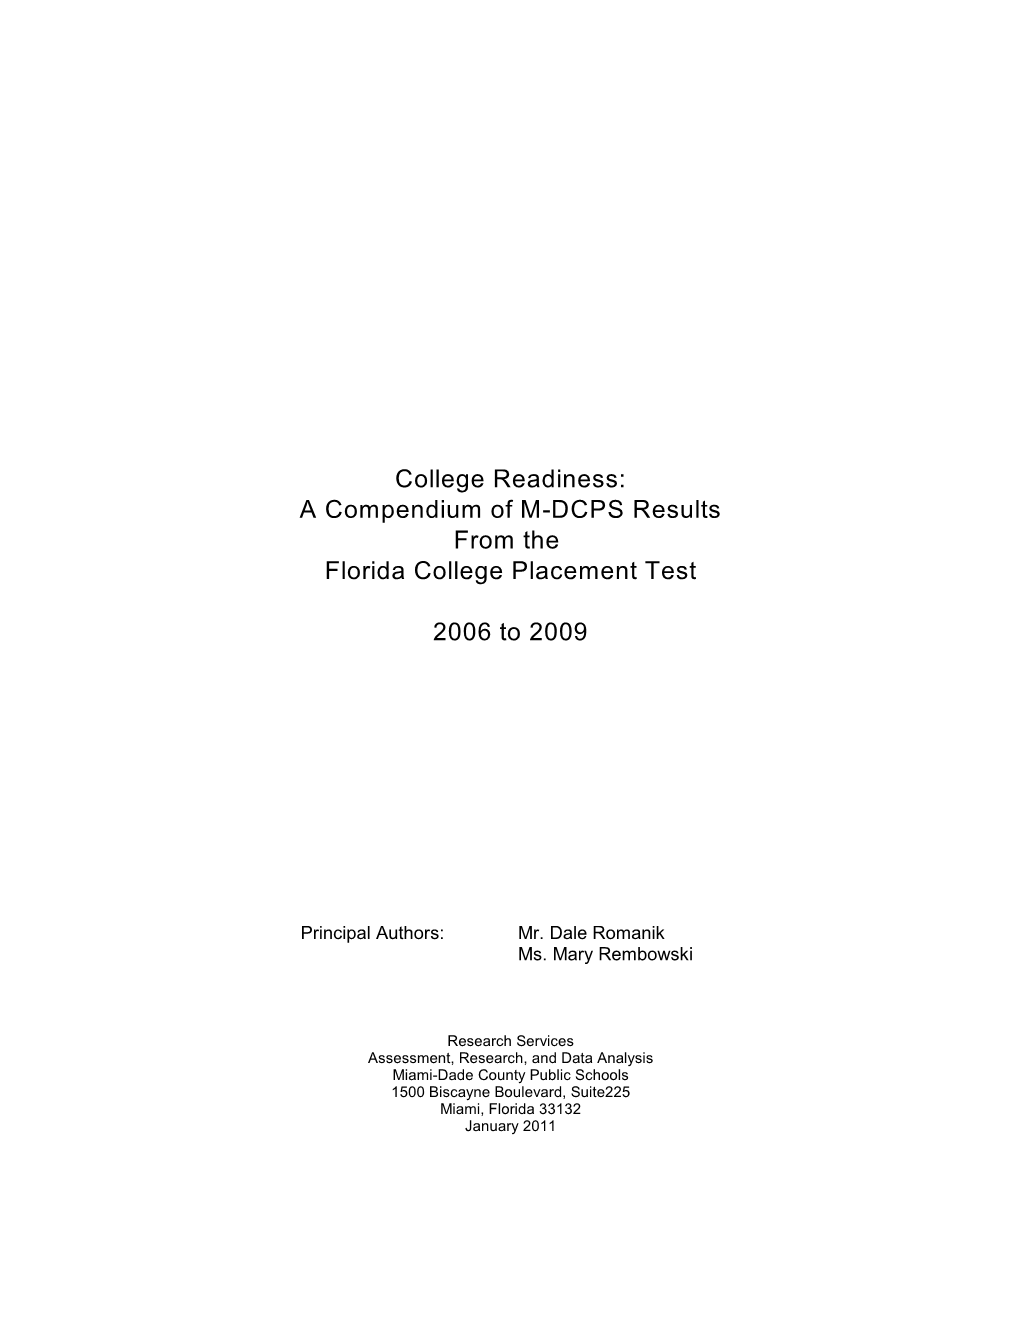 College Readiness: a Compendium of M-DCPS Results from the Florida College Placement Test